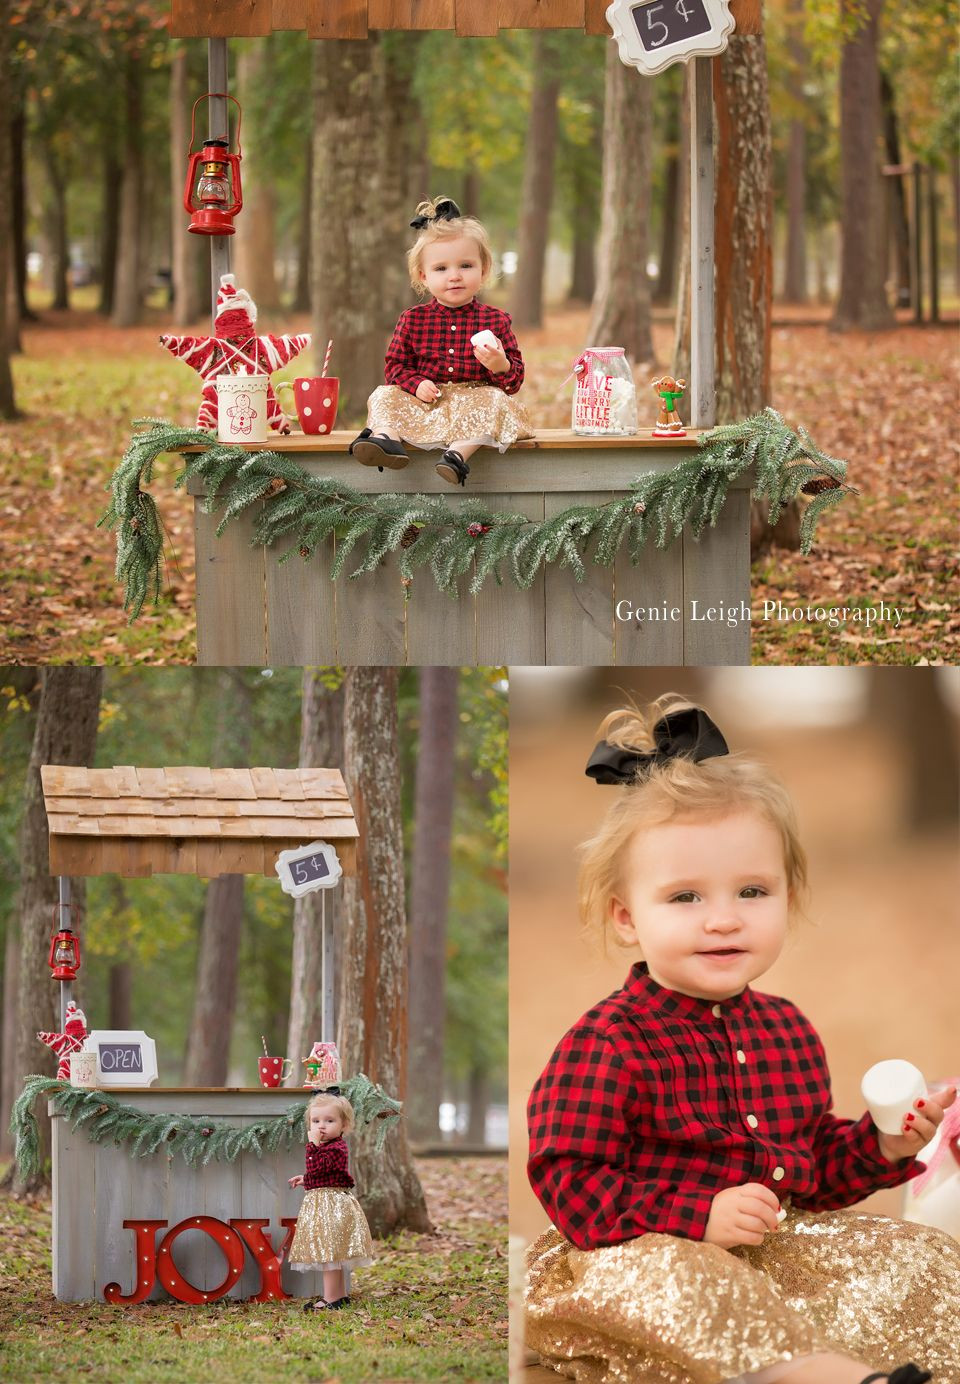 DIY Christmas Photography
 Hot Chocolate Stand Cocoa Homemade DIY Prop Genie